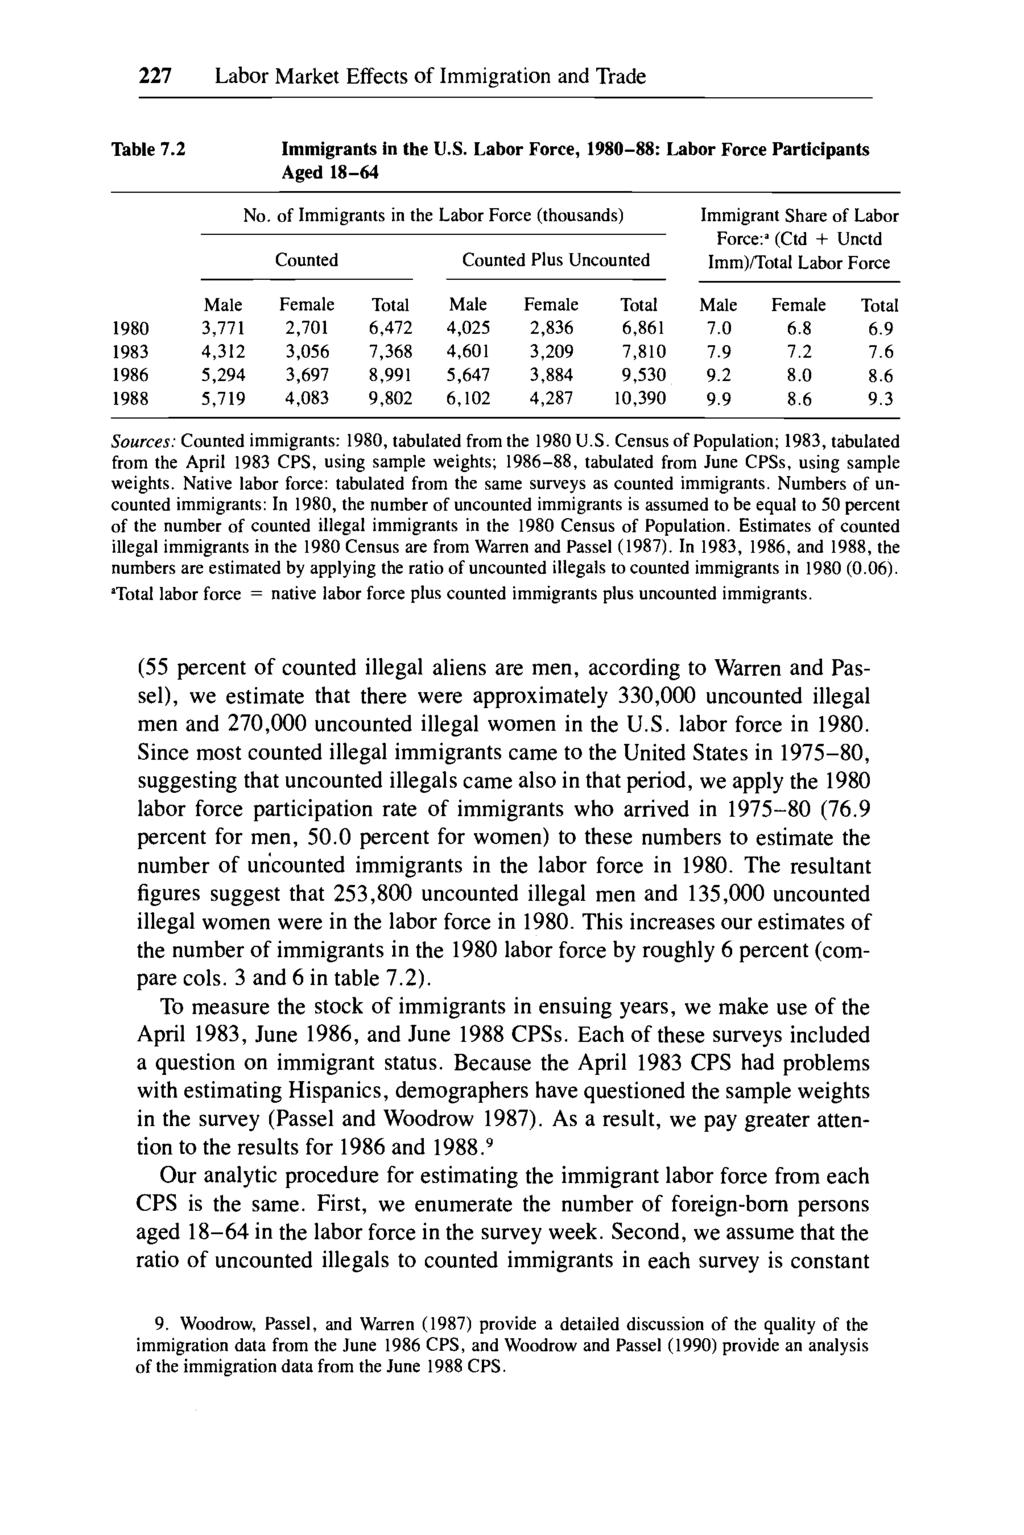 227 Labor Market Effects of Immigration and Trade Table 7.2 Immigrants in the U.S. Labor Force, 1980-88: Labor Force Participants Aged 18-64 No.